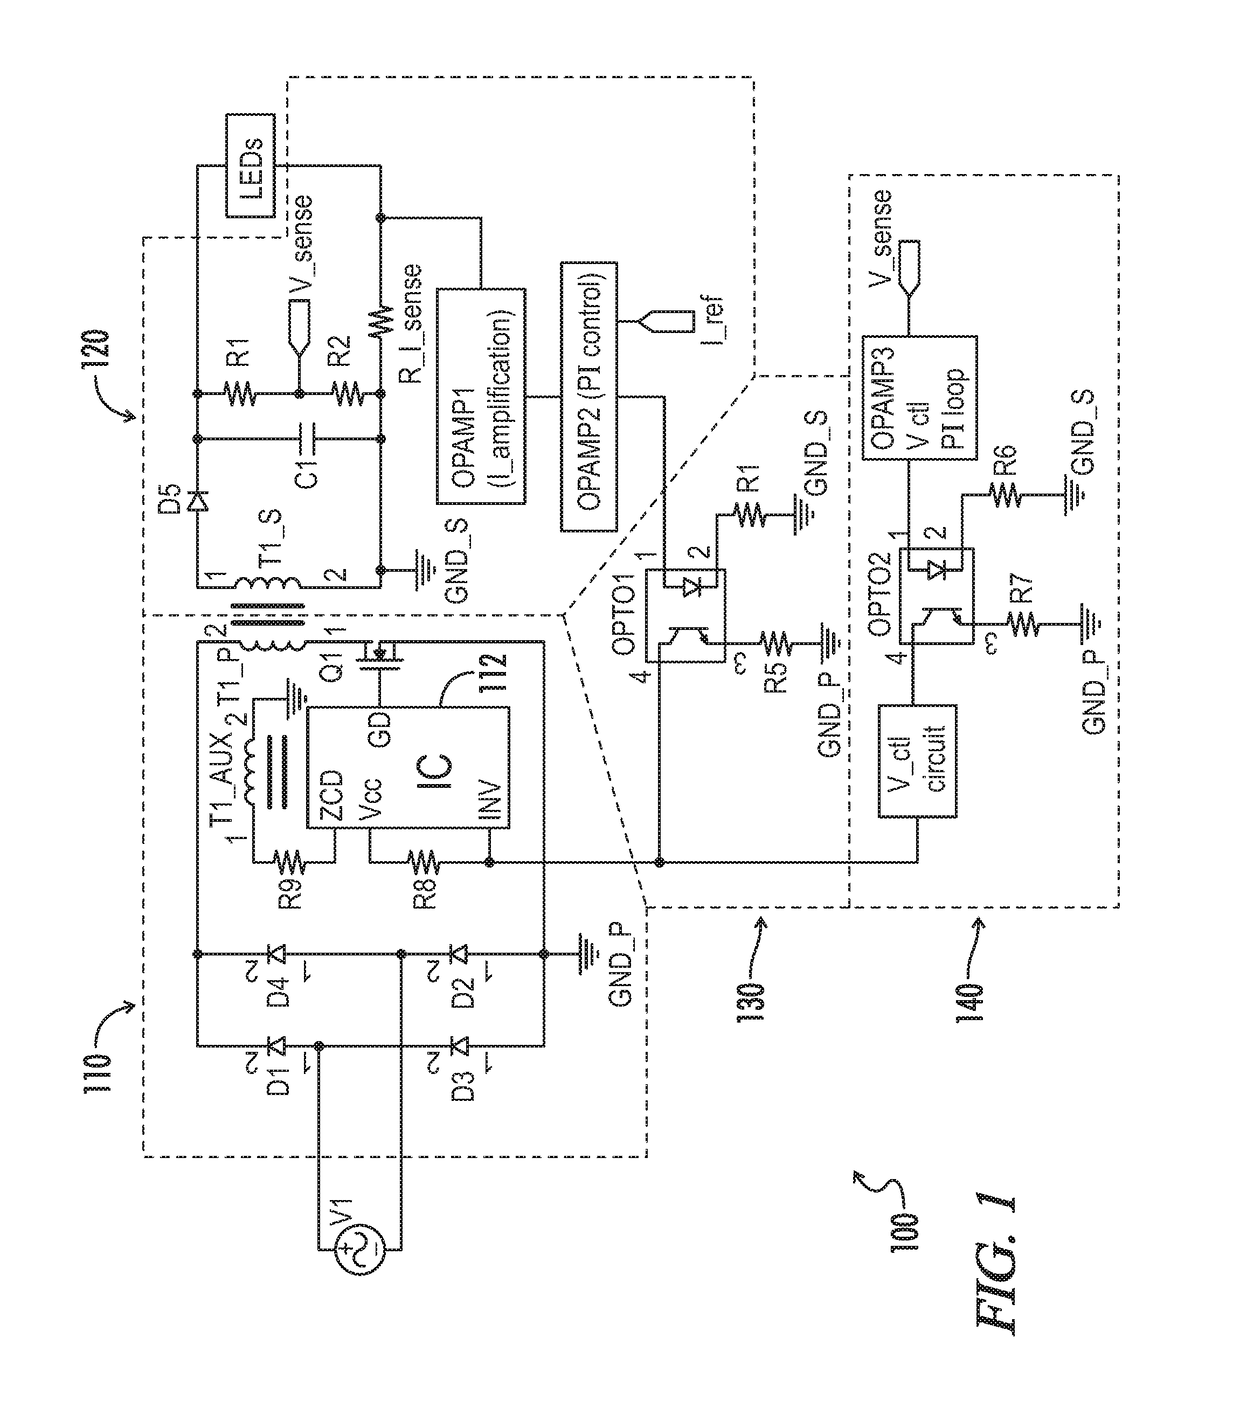 Current and voltage control circuit and method for a class II LED driver